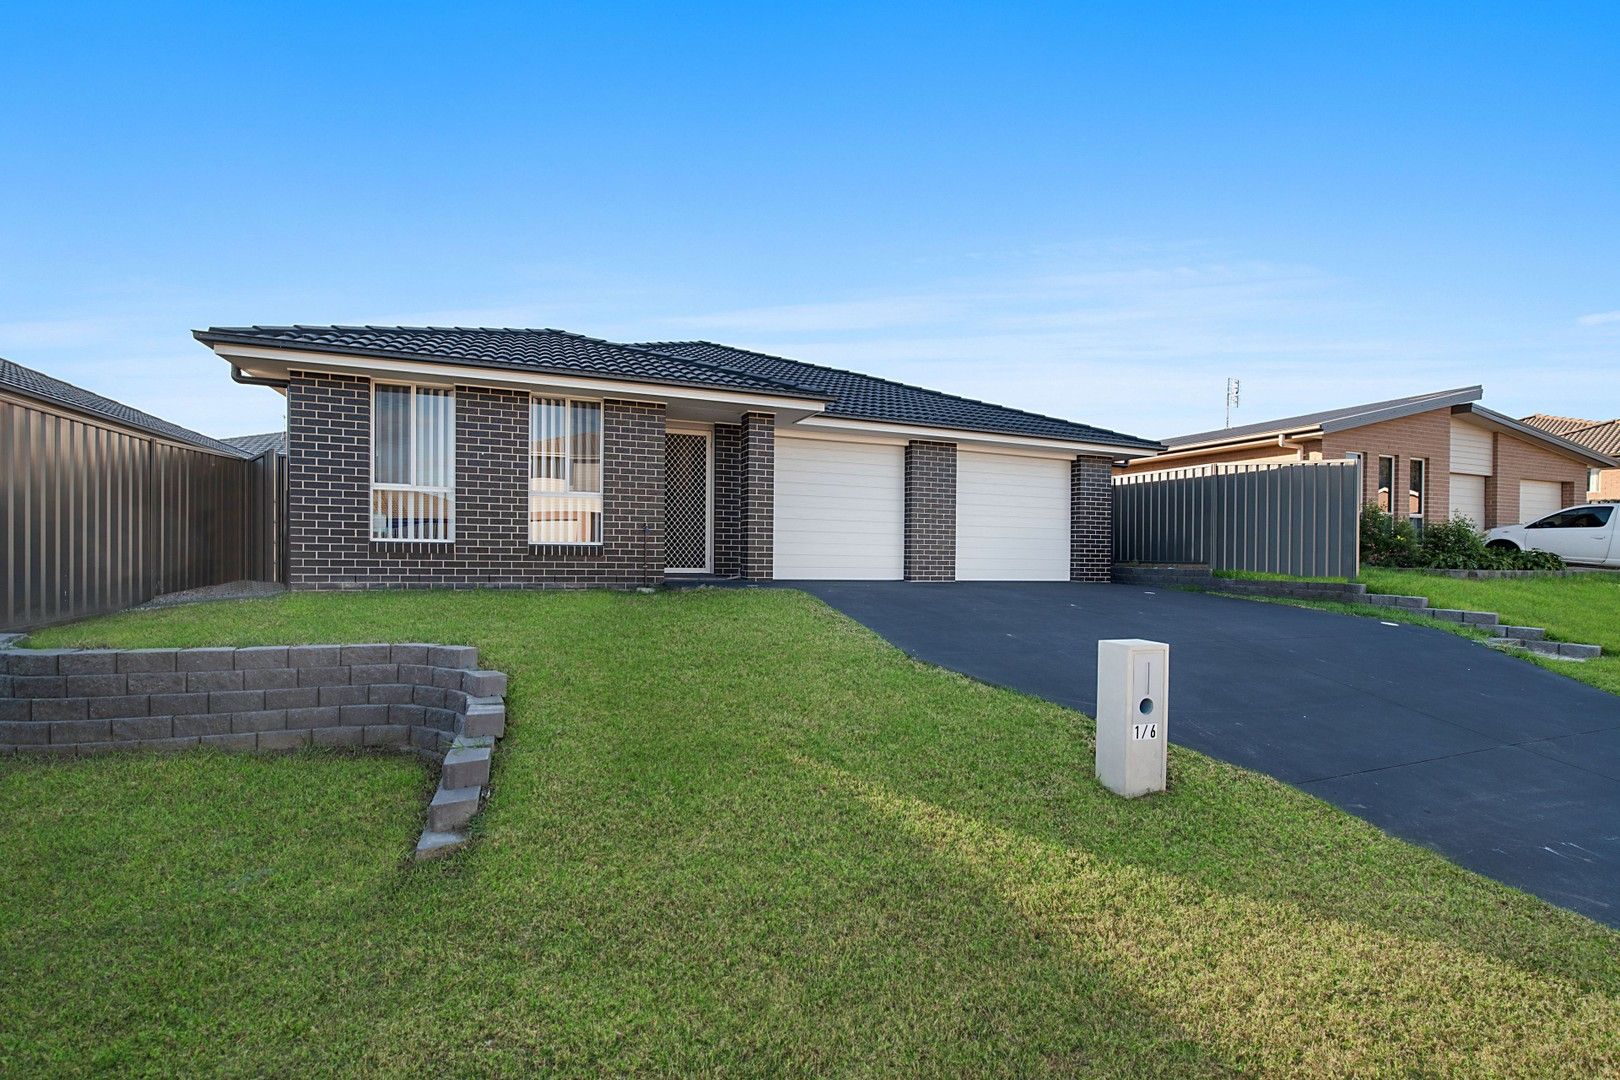 1 & 2/6 Shalistan Street, Cliftleigh NSW 2321, Image 0